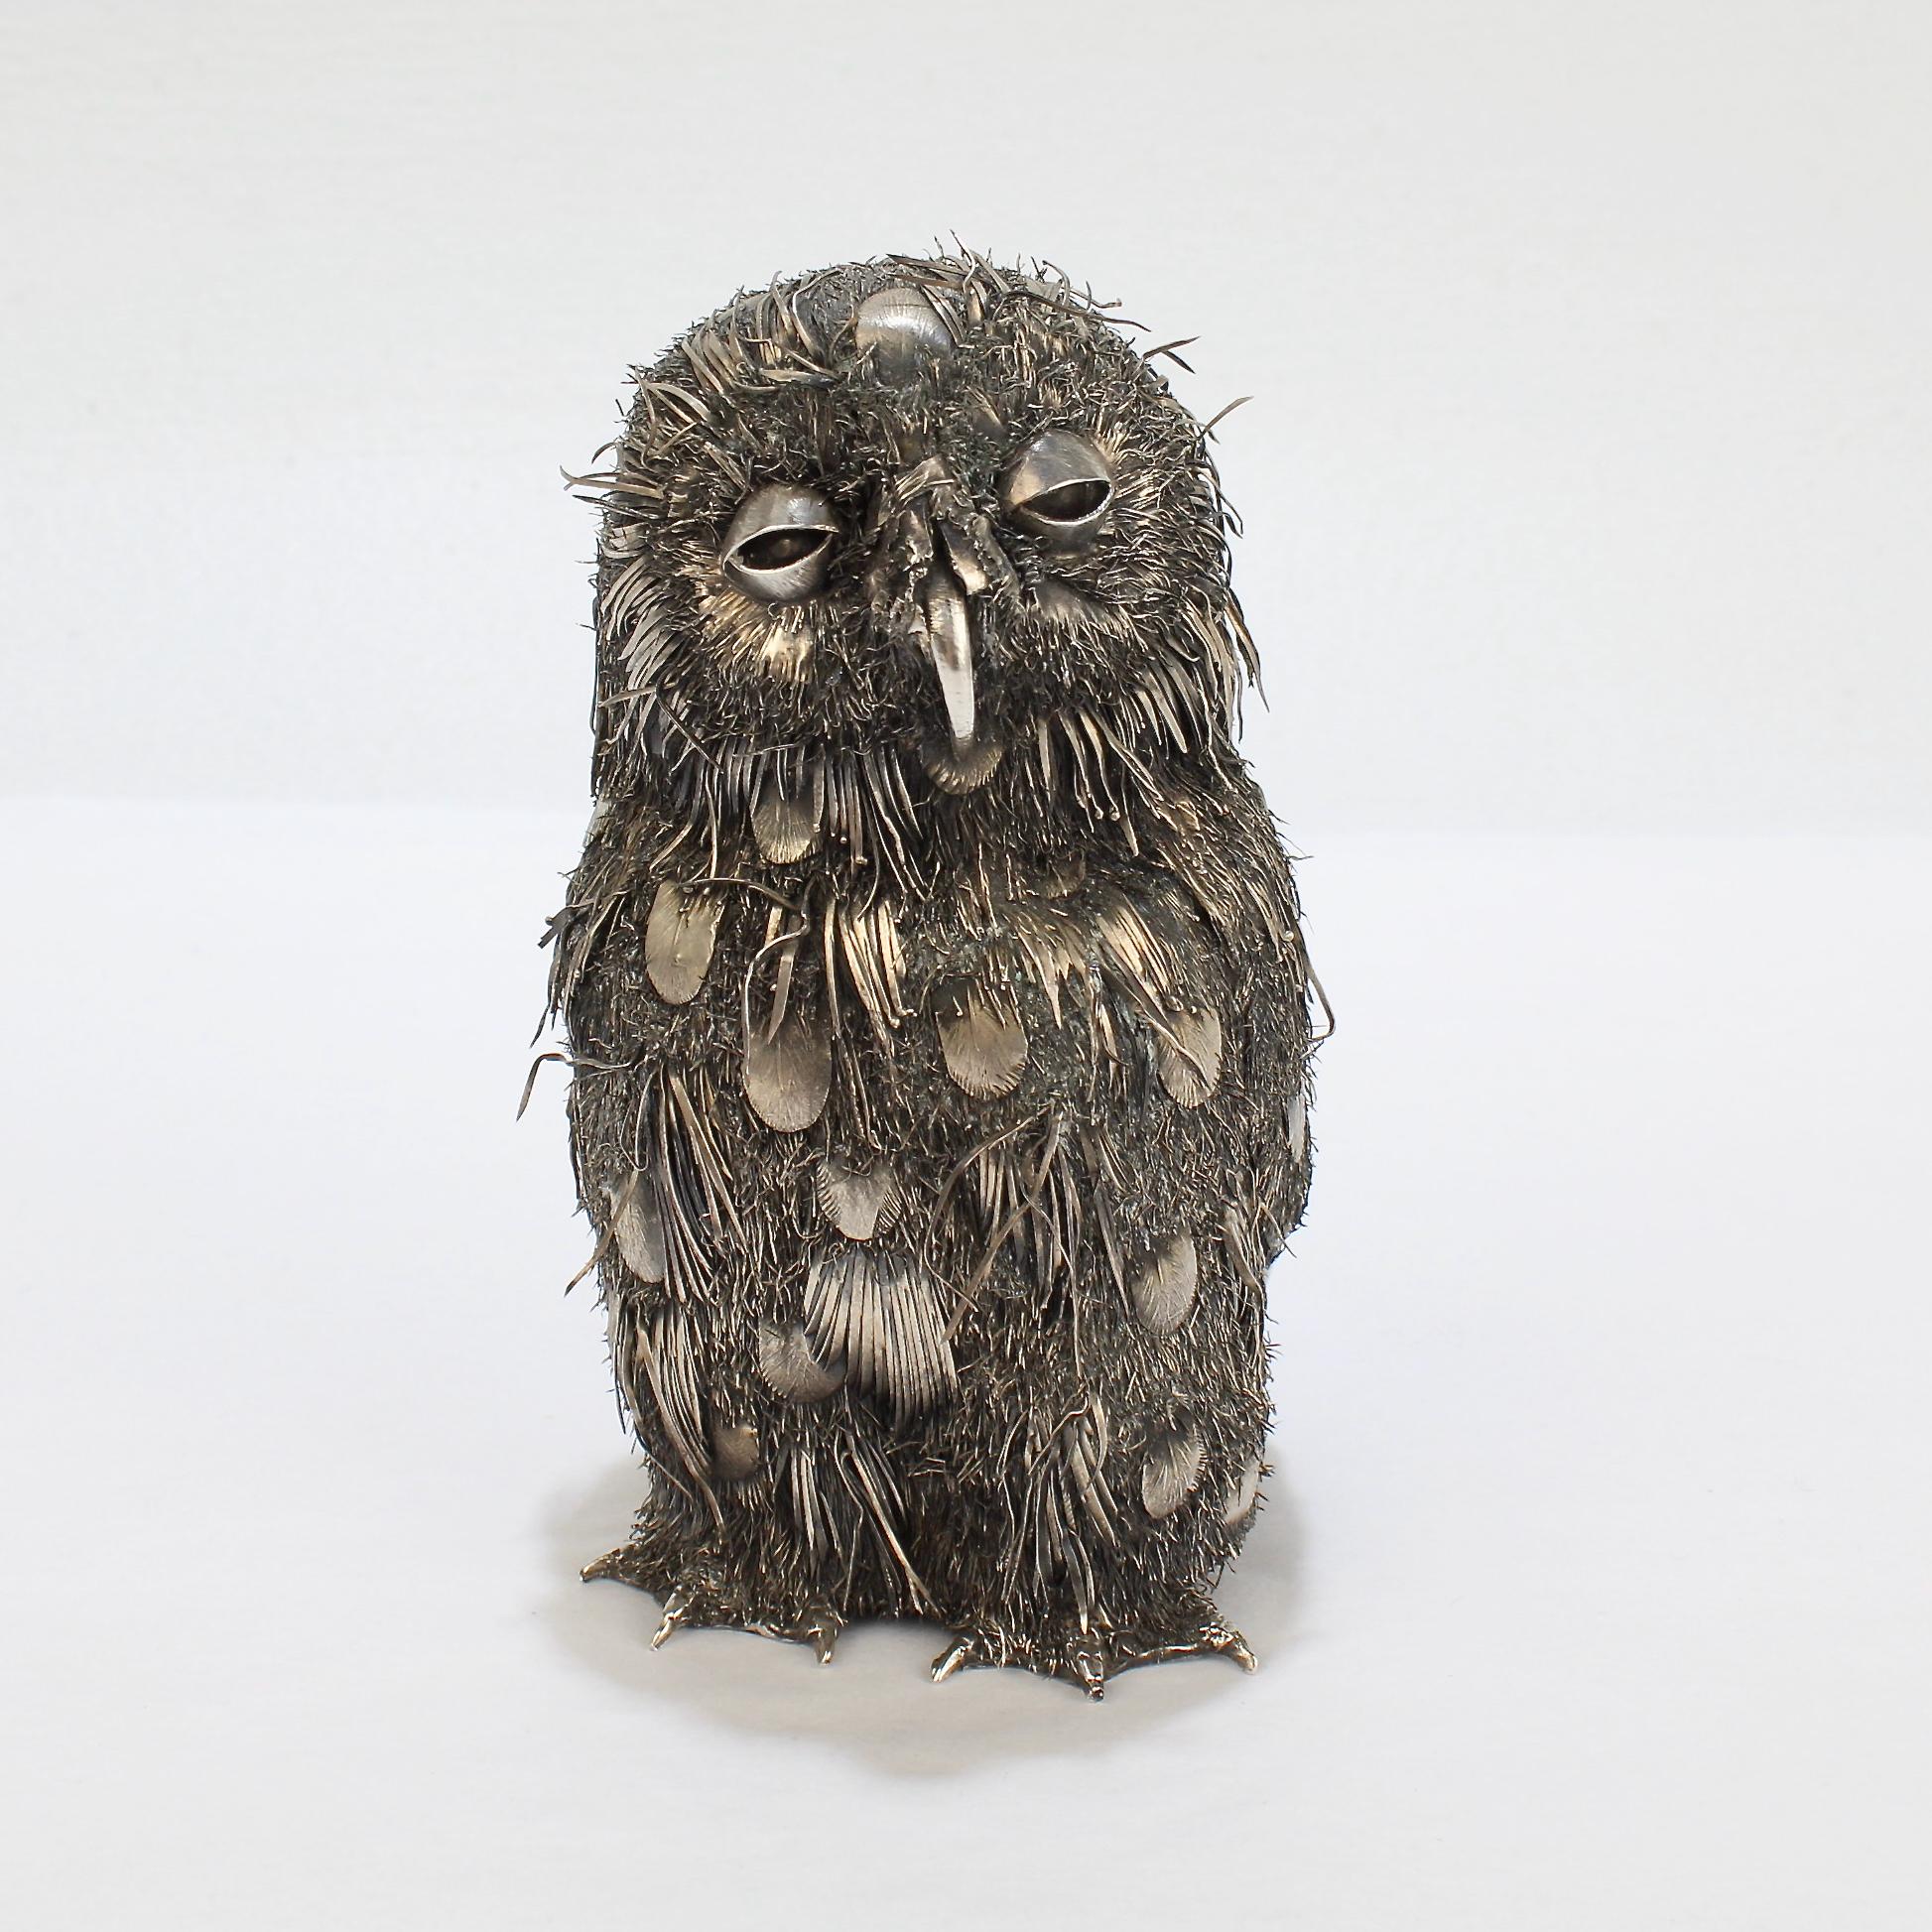 A very fine silver figurine of a fledgling owl. 

Modeled as a sleepy-eyed baby owl in .800 silver by Gianmaria Buccellati.

Simply a wonderful Buccellati sculpture!

Provenance:
Private Hudson, NY Collection
Antique Cupboard

Overall Condition:
It